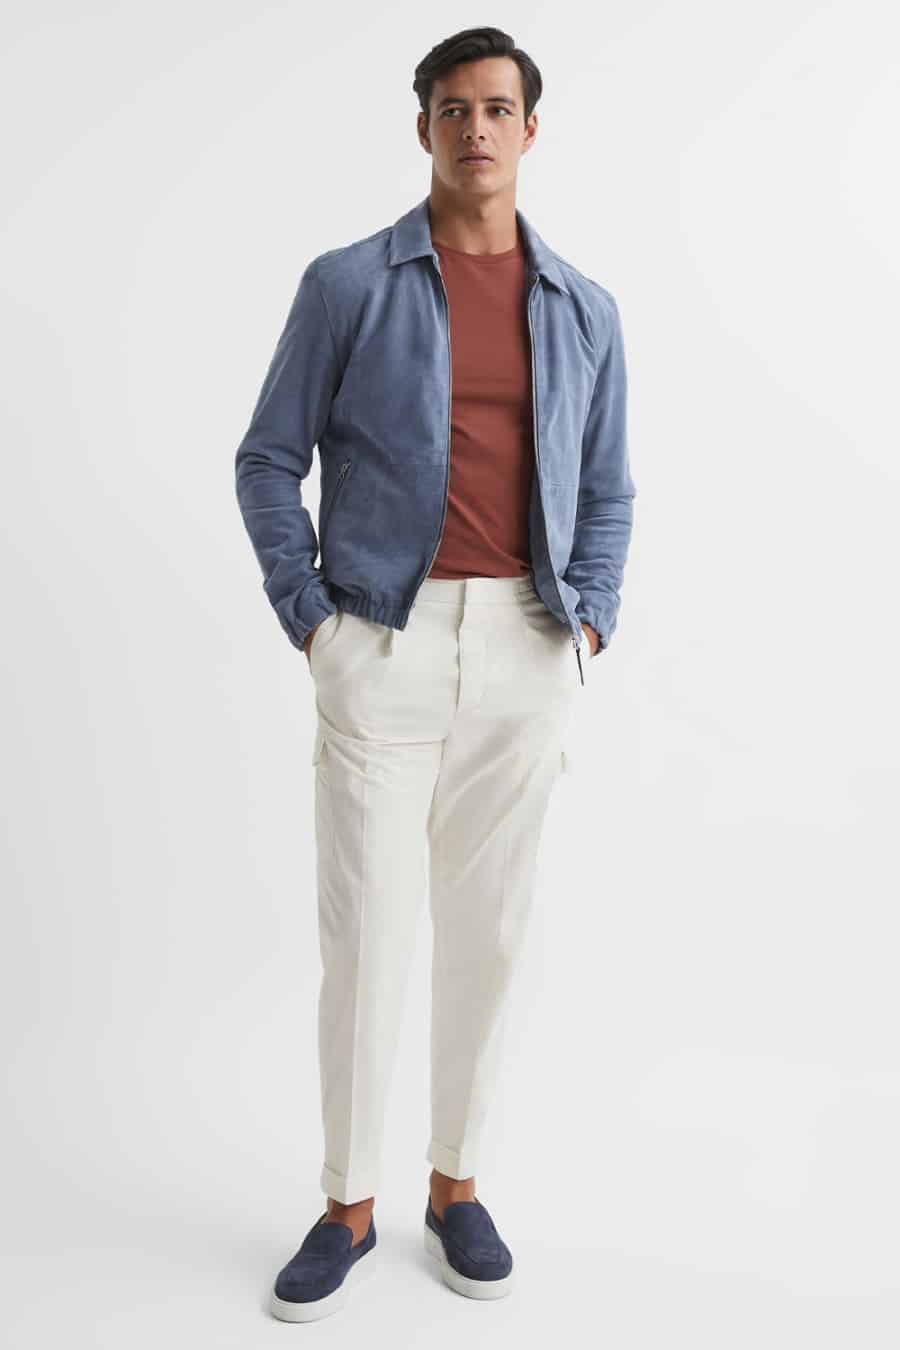 Men's Spring Outfits: 100s Of Stylish Looks For 2022